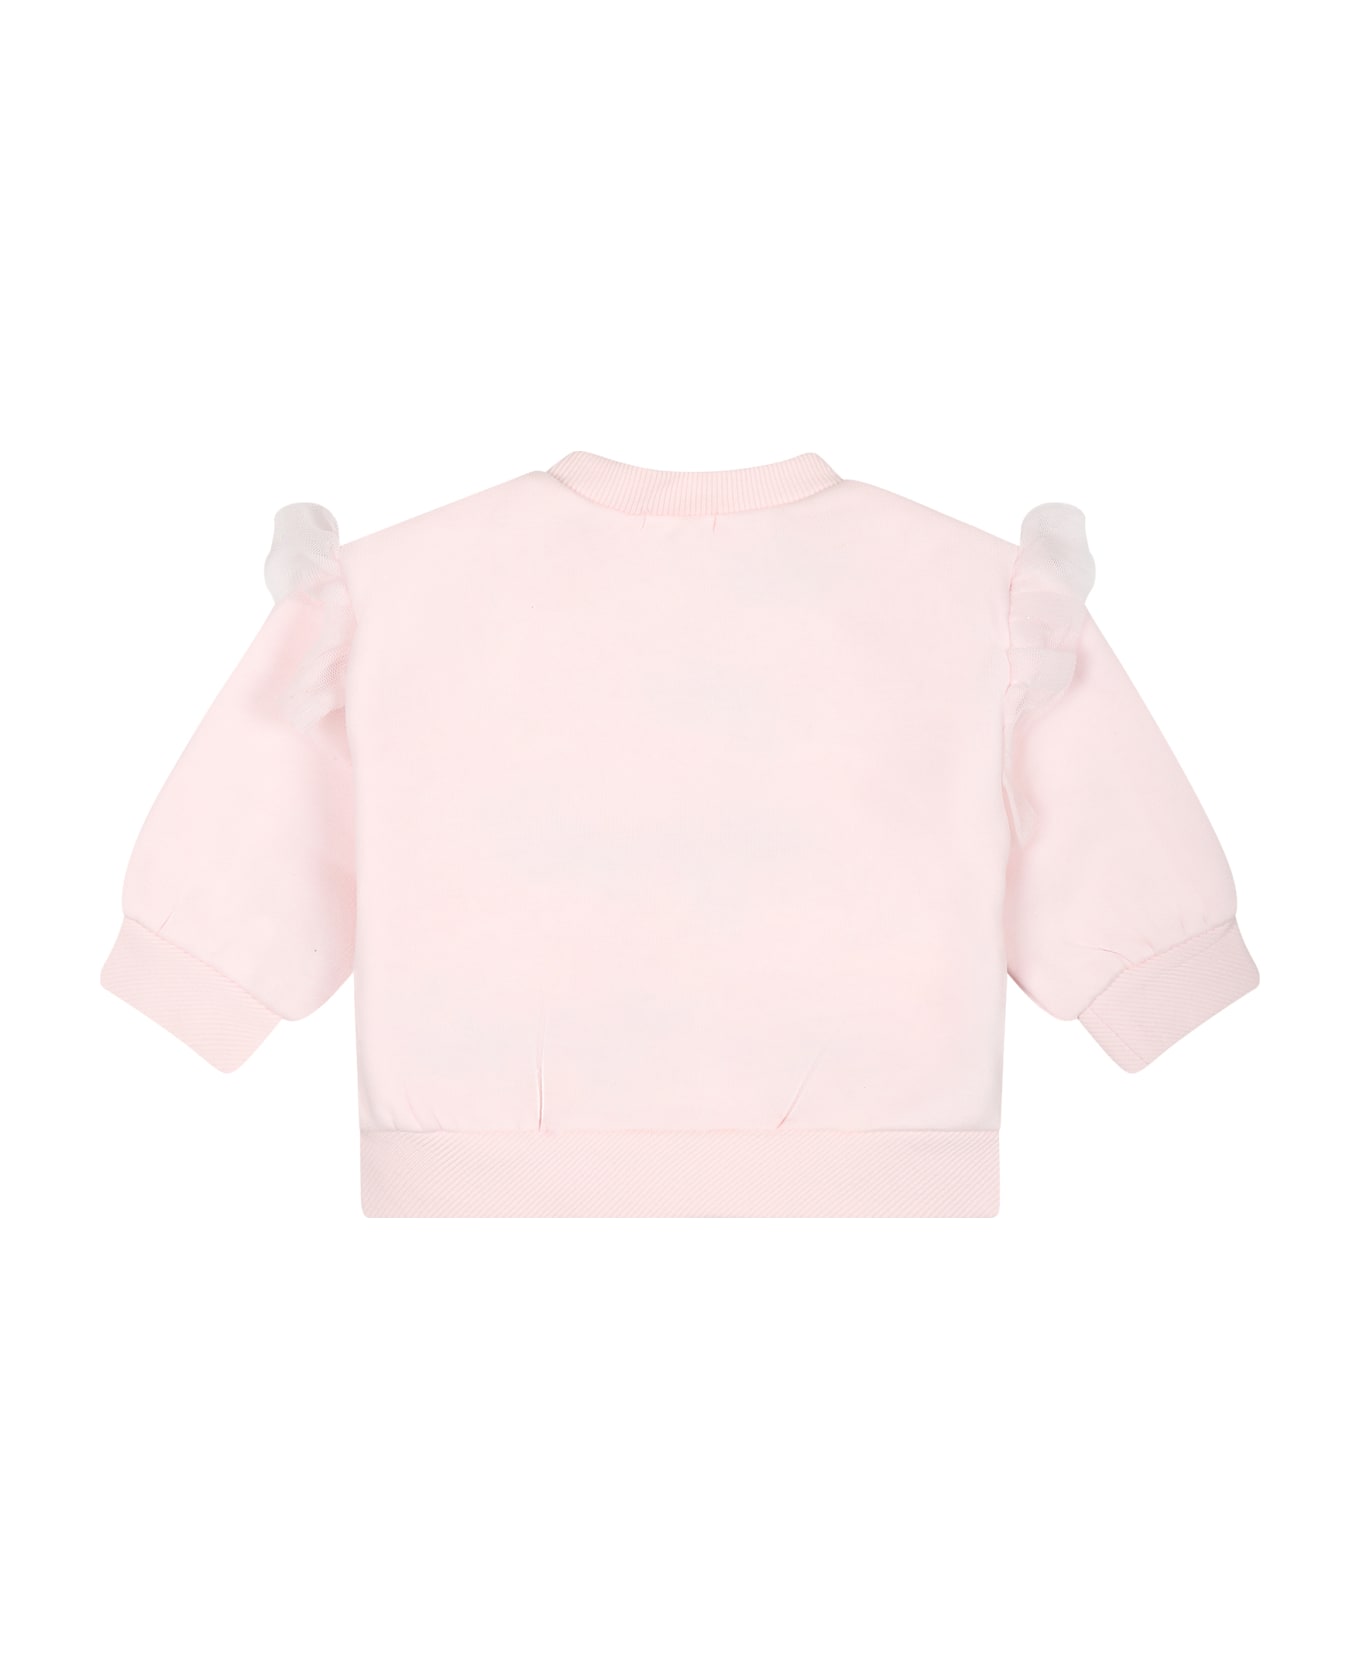 Billieblush Pink Sweatshirt For Baby Girls With Multicolor Print - Pink